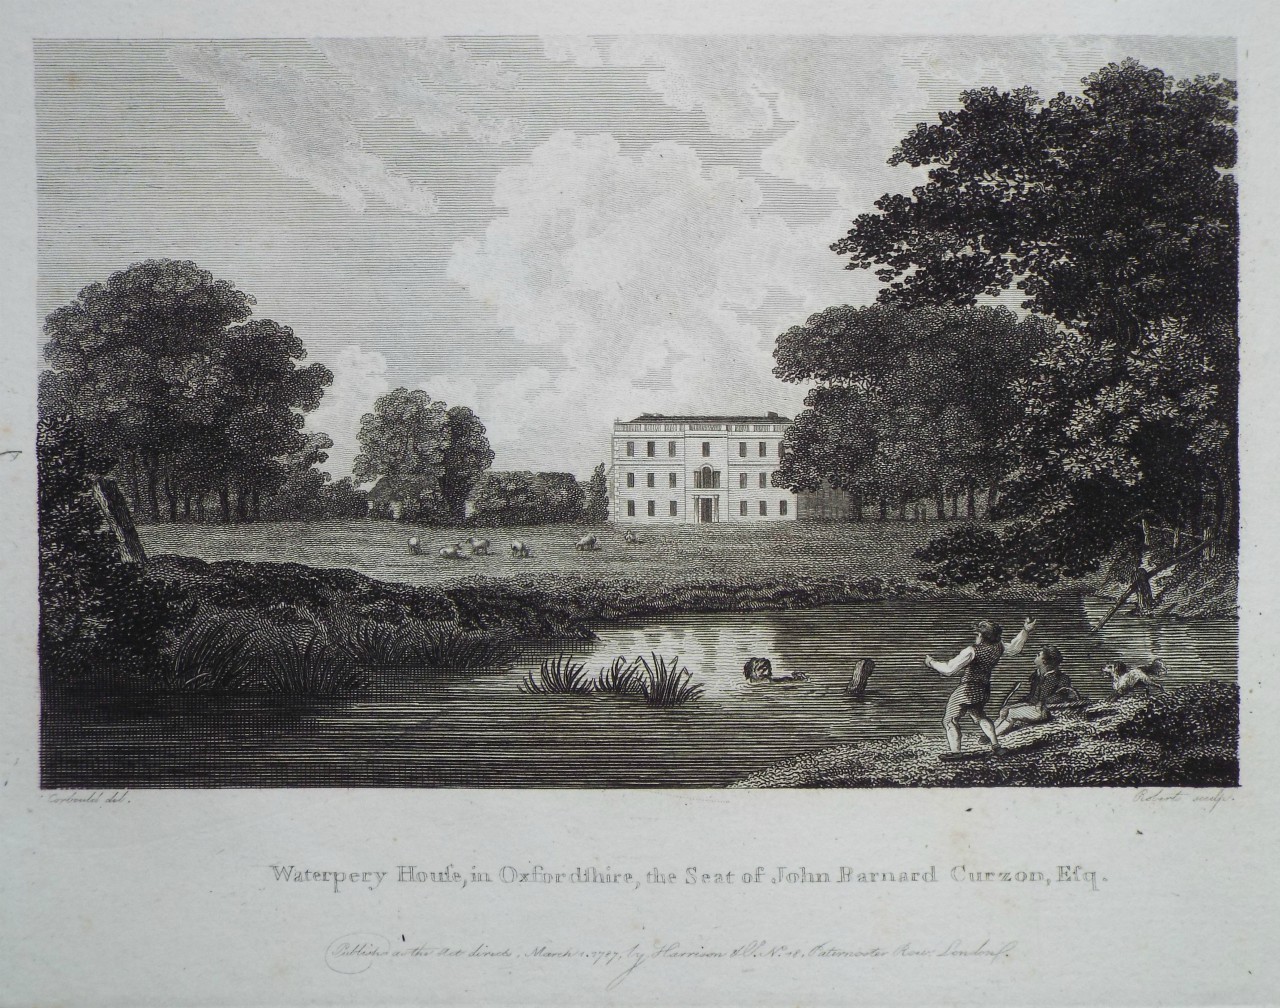 Print - Waterpery House, in Oxfordshire, the Seat of John Barnard Curzon, Esq. - 